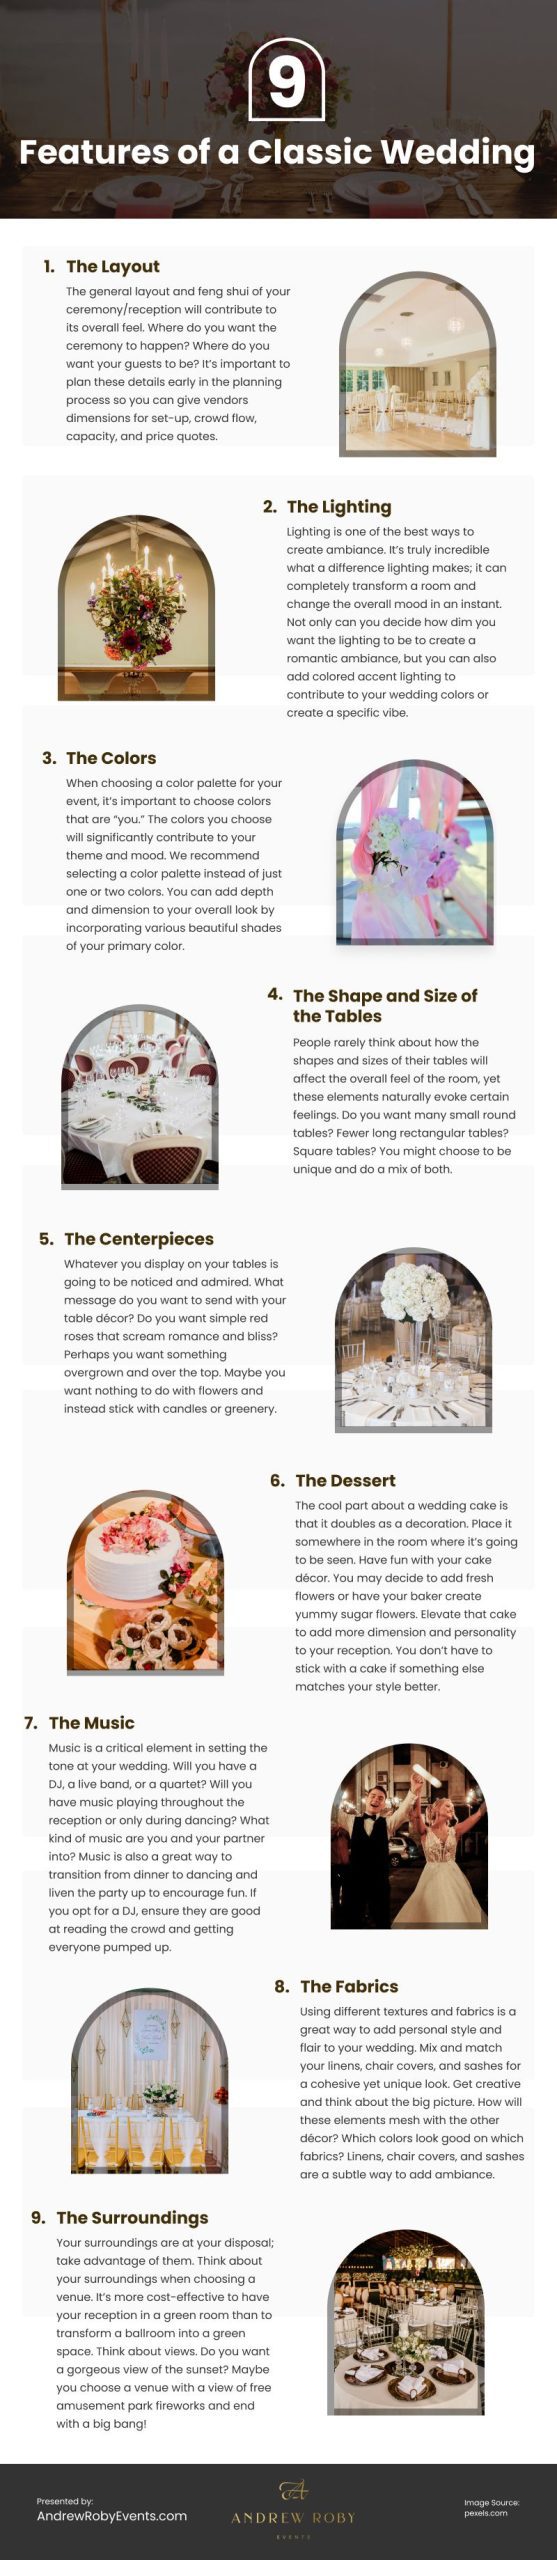 9 Features of a Classic Wedding Infographic